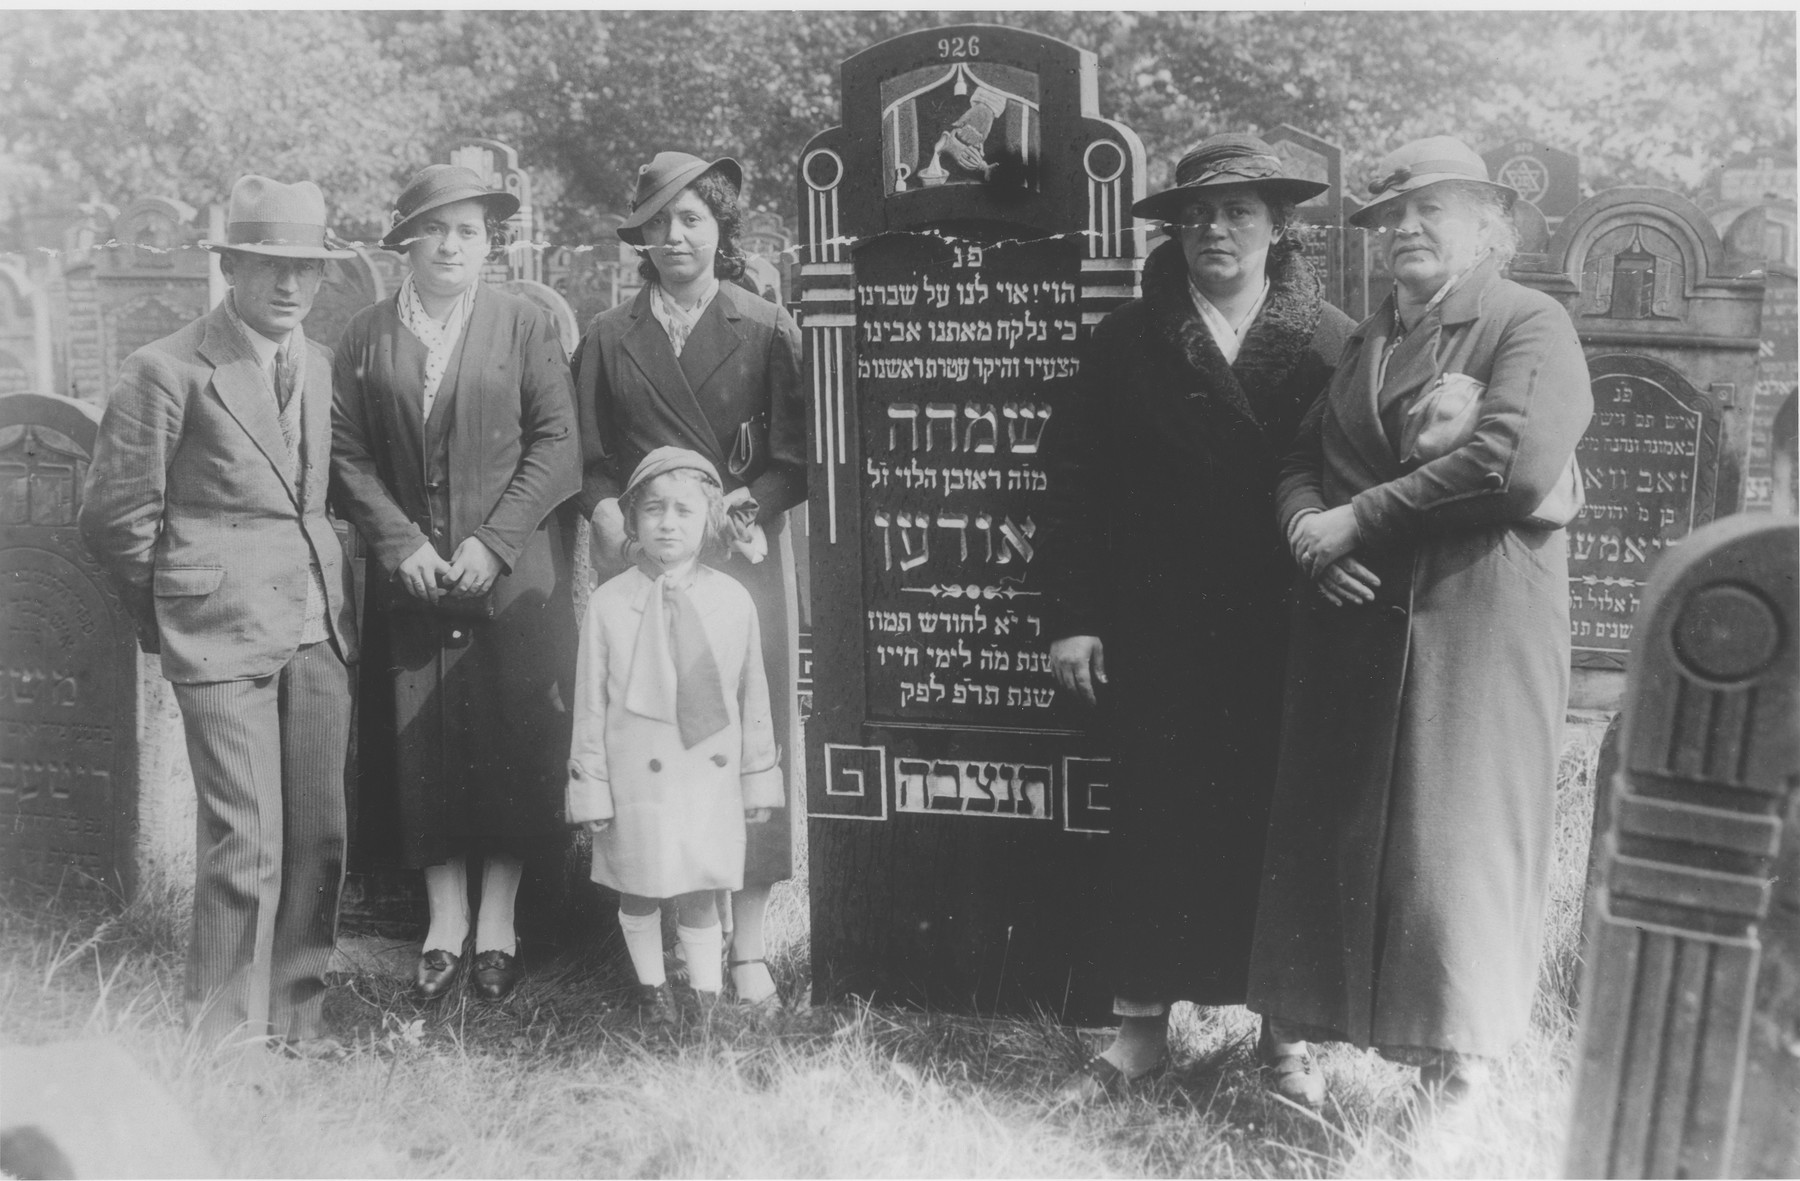 The Laudon family poses next to the tombstone of Symcha Laudon during the unveiling ceremony.

Standing from left to right are Wolf Laudon, Rywka Perla (last name unknown), Cyla Laudon, Maria Frajda's sister and Maria Frajda Laudon.